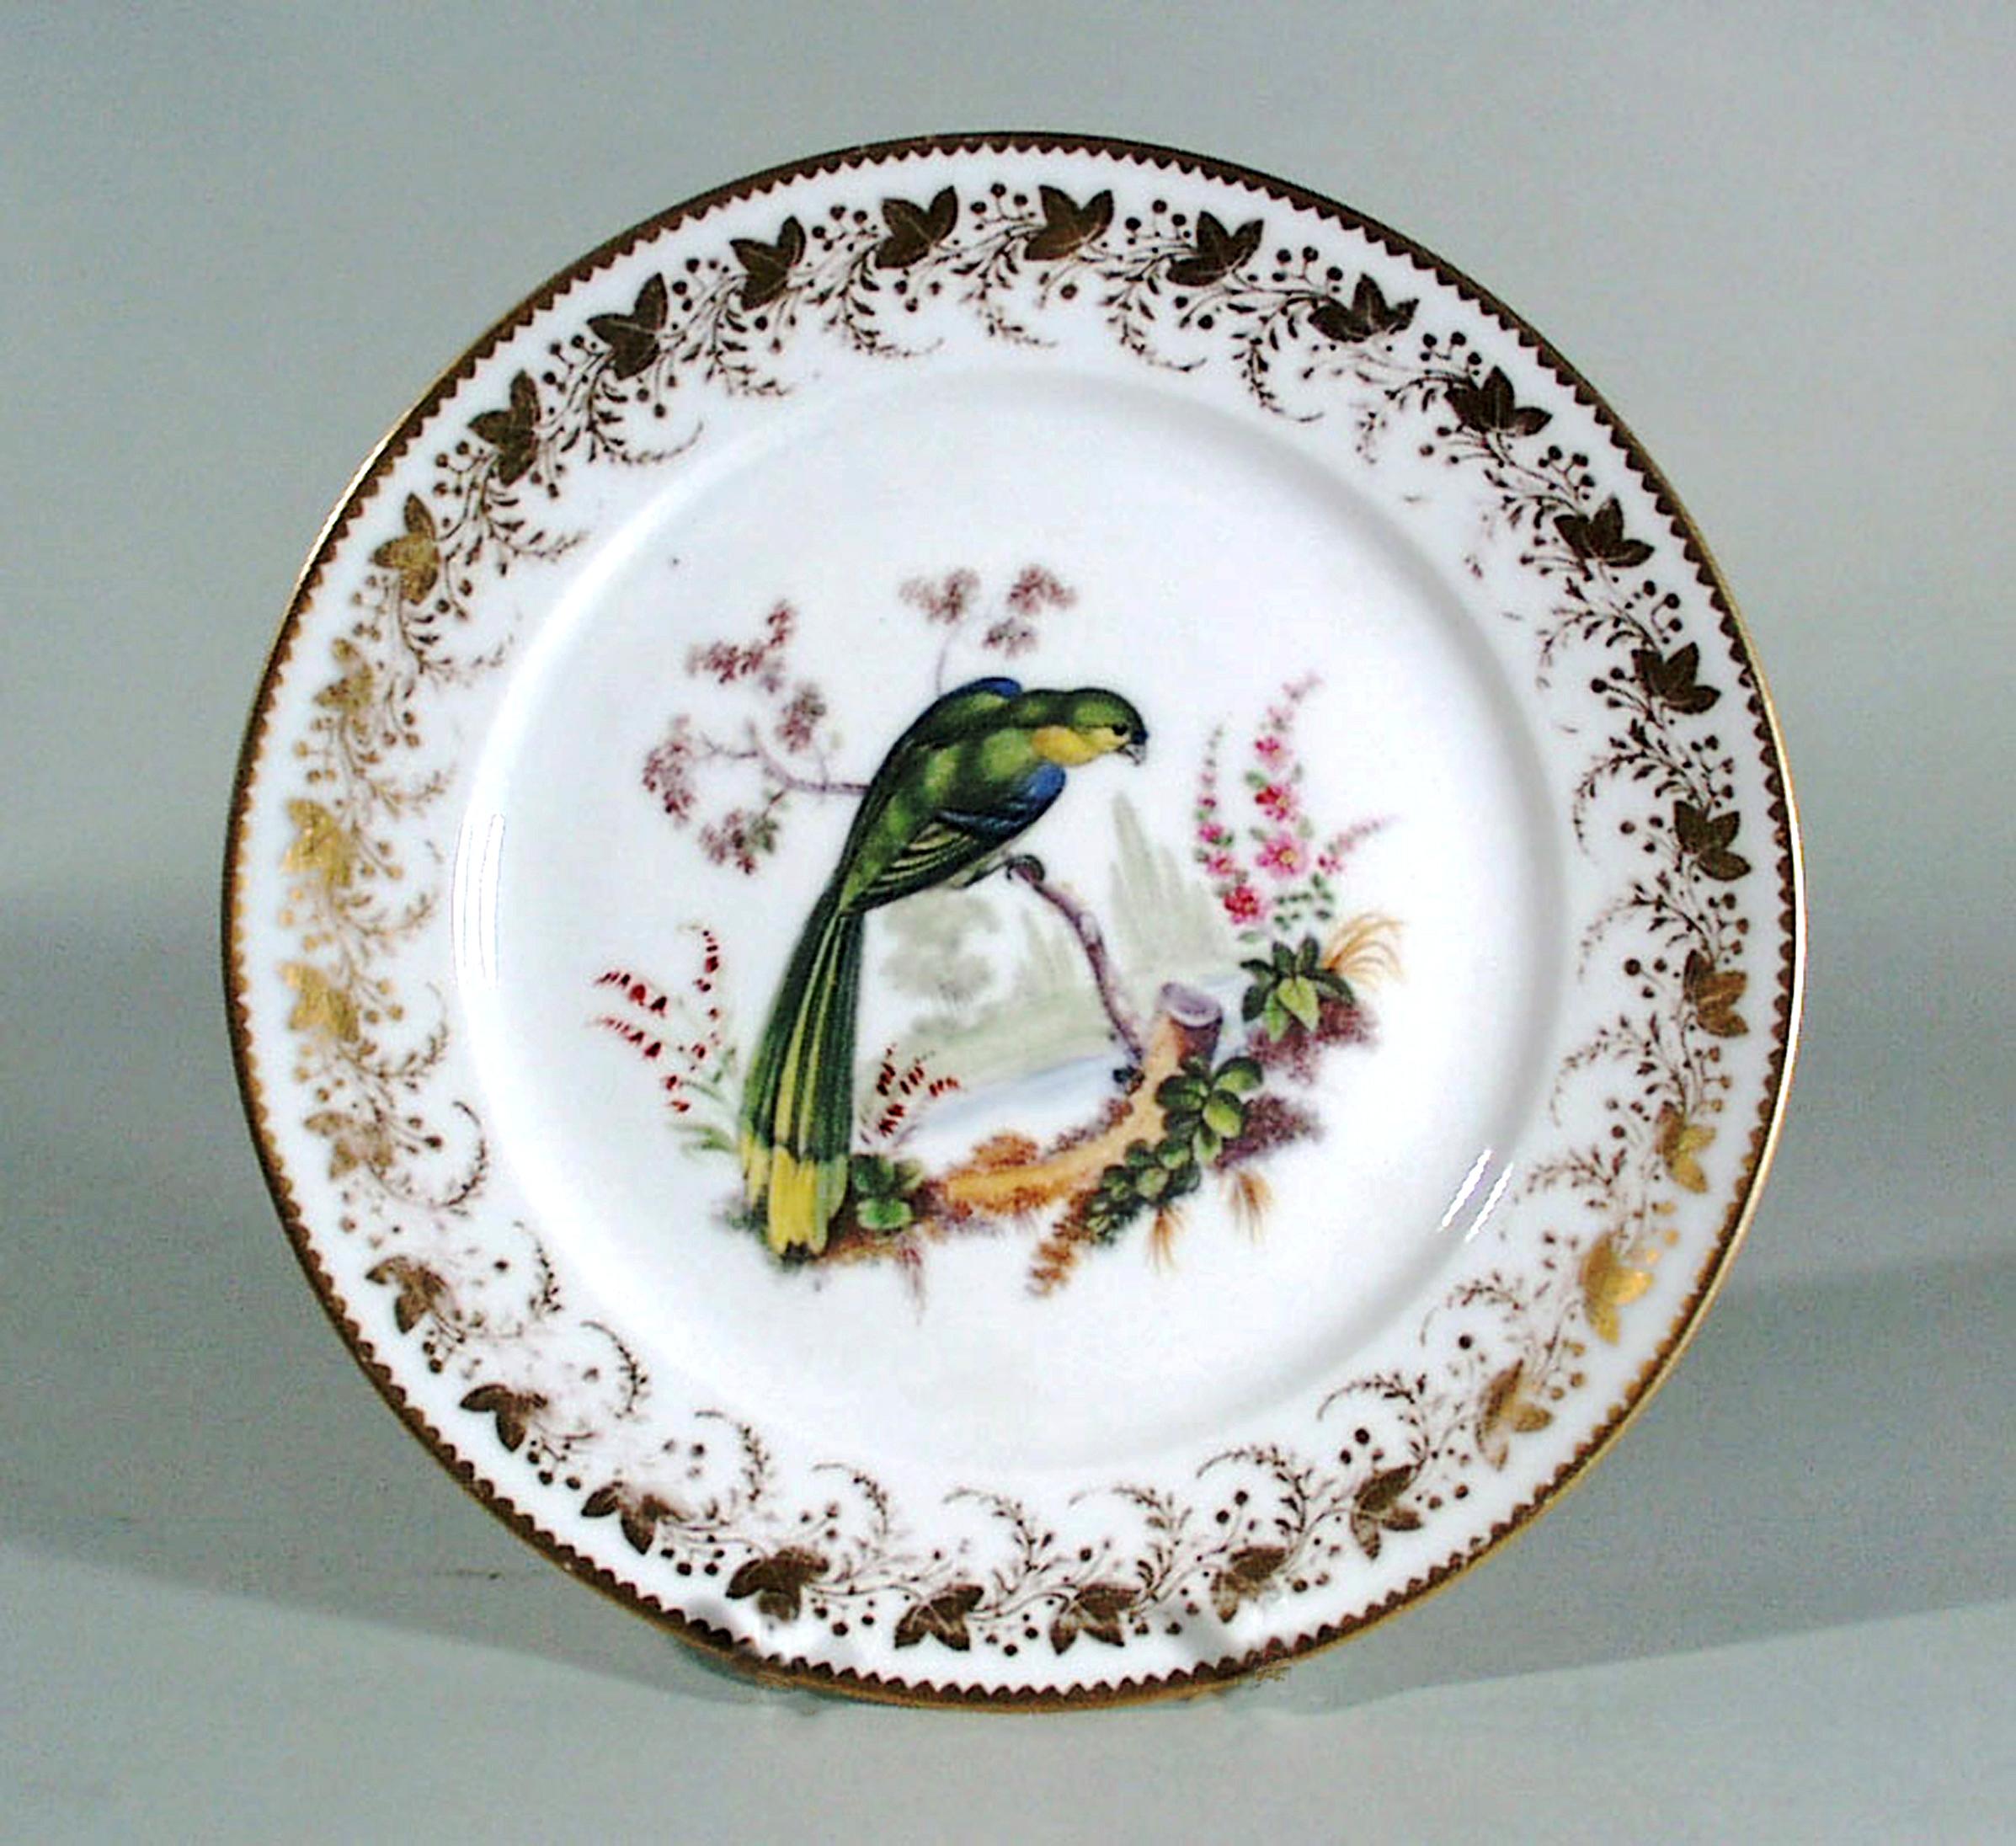 19th Century Antique London-Decorated Paris Porcelain Plate Probably by Thomas Randall